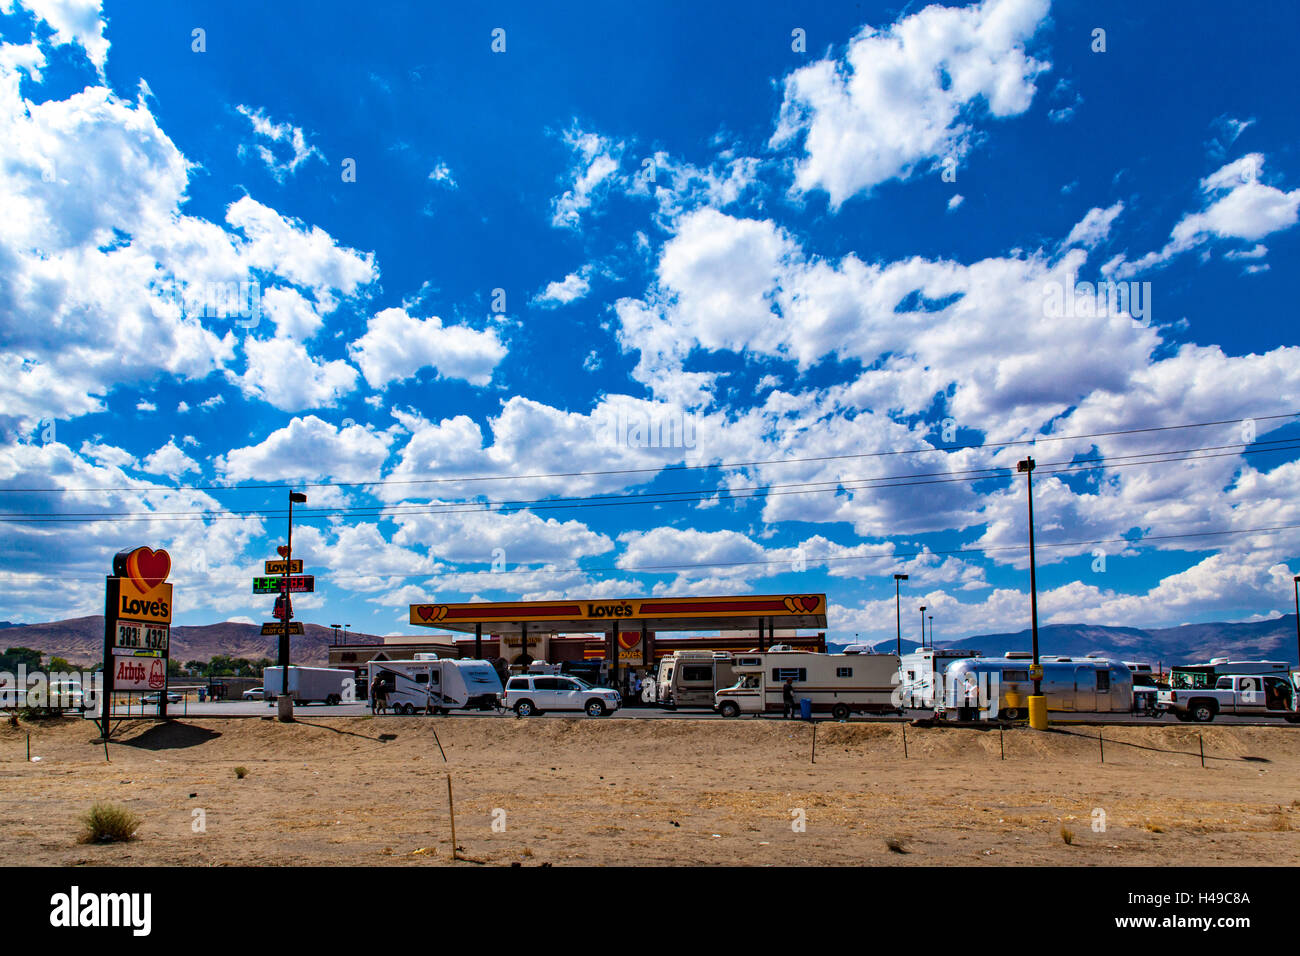 Burners on their way to Burning man stop in Fernley Nevada to stock up for the week in Black Rock City Stock Photo